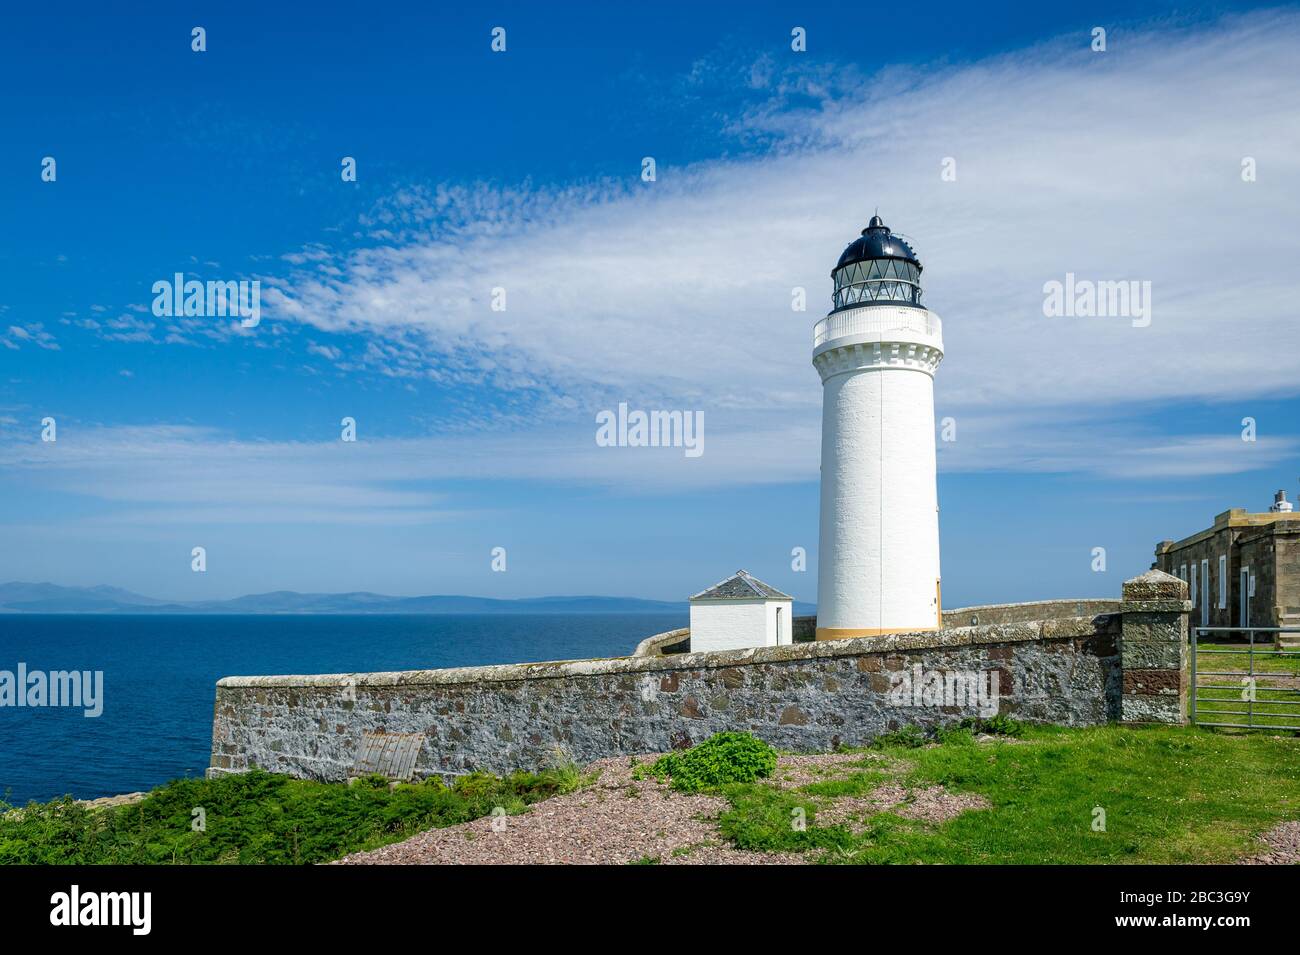 White lighthouse tower and stone fence. Davaar island, Scotland Stock Photo